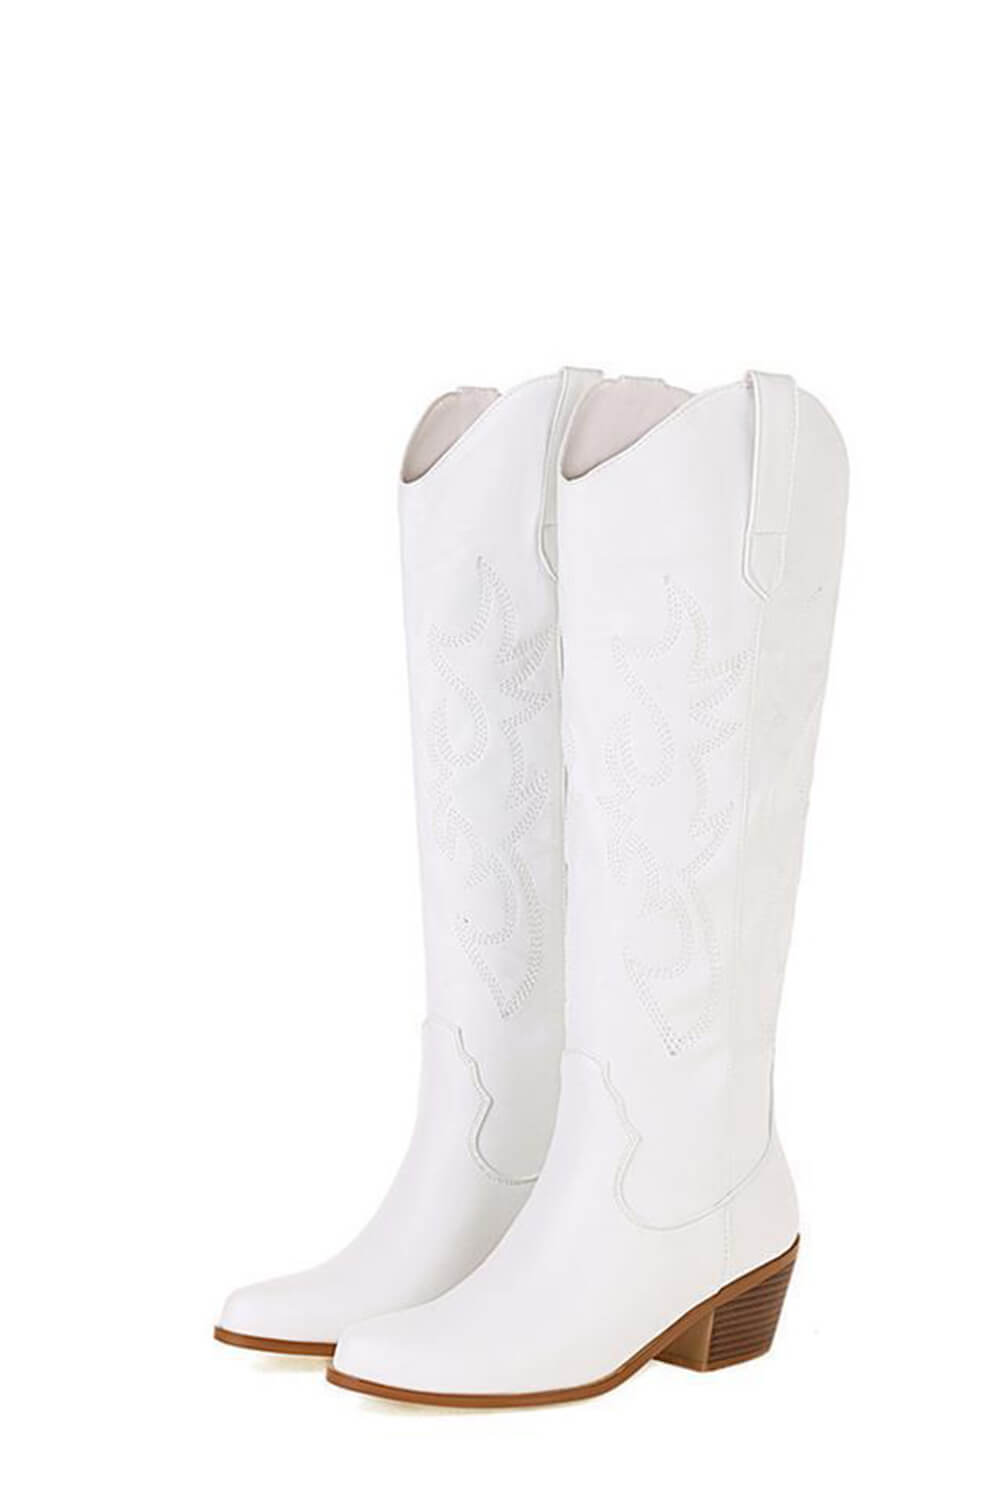 Leather Western Cowboy Almond Toe Knee High Block Heeled Boots - White